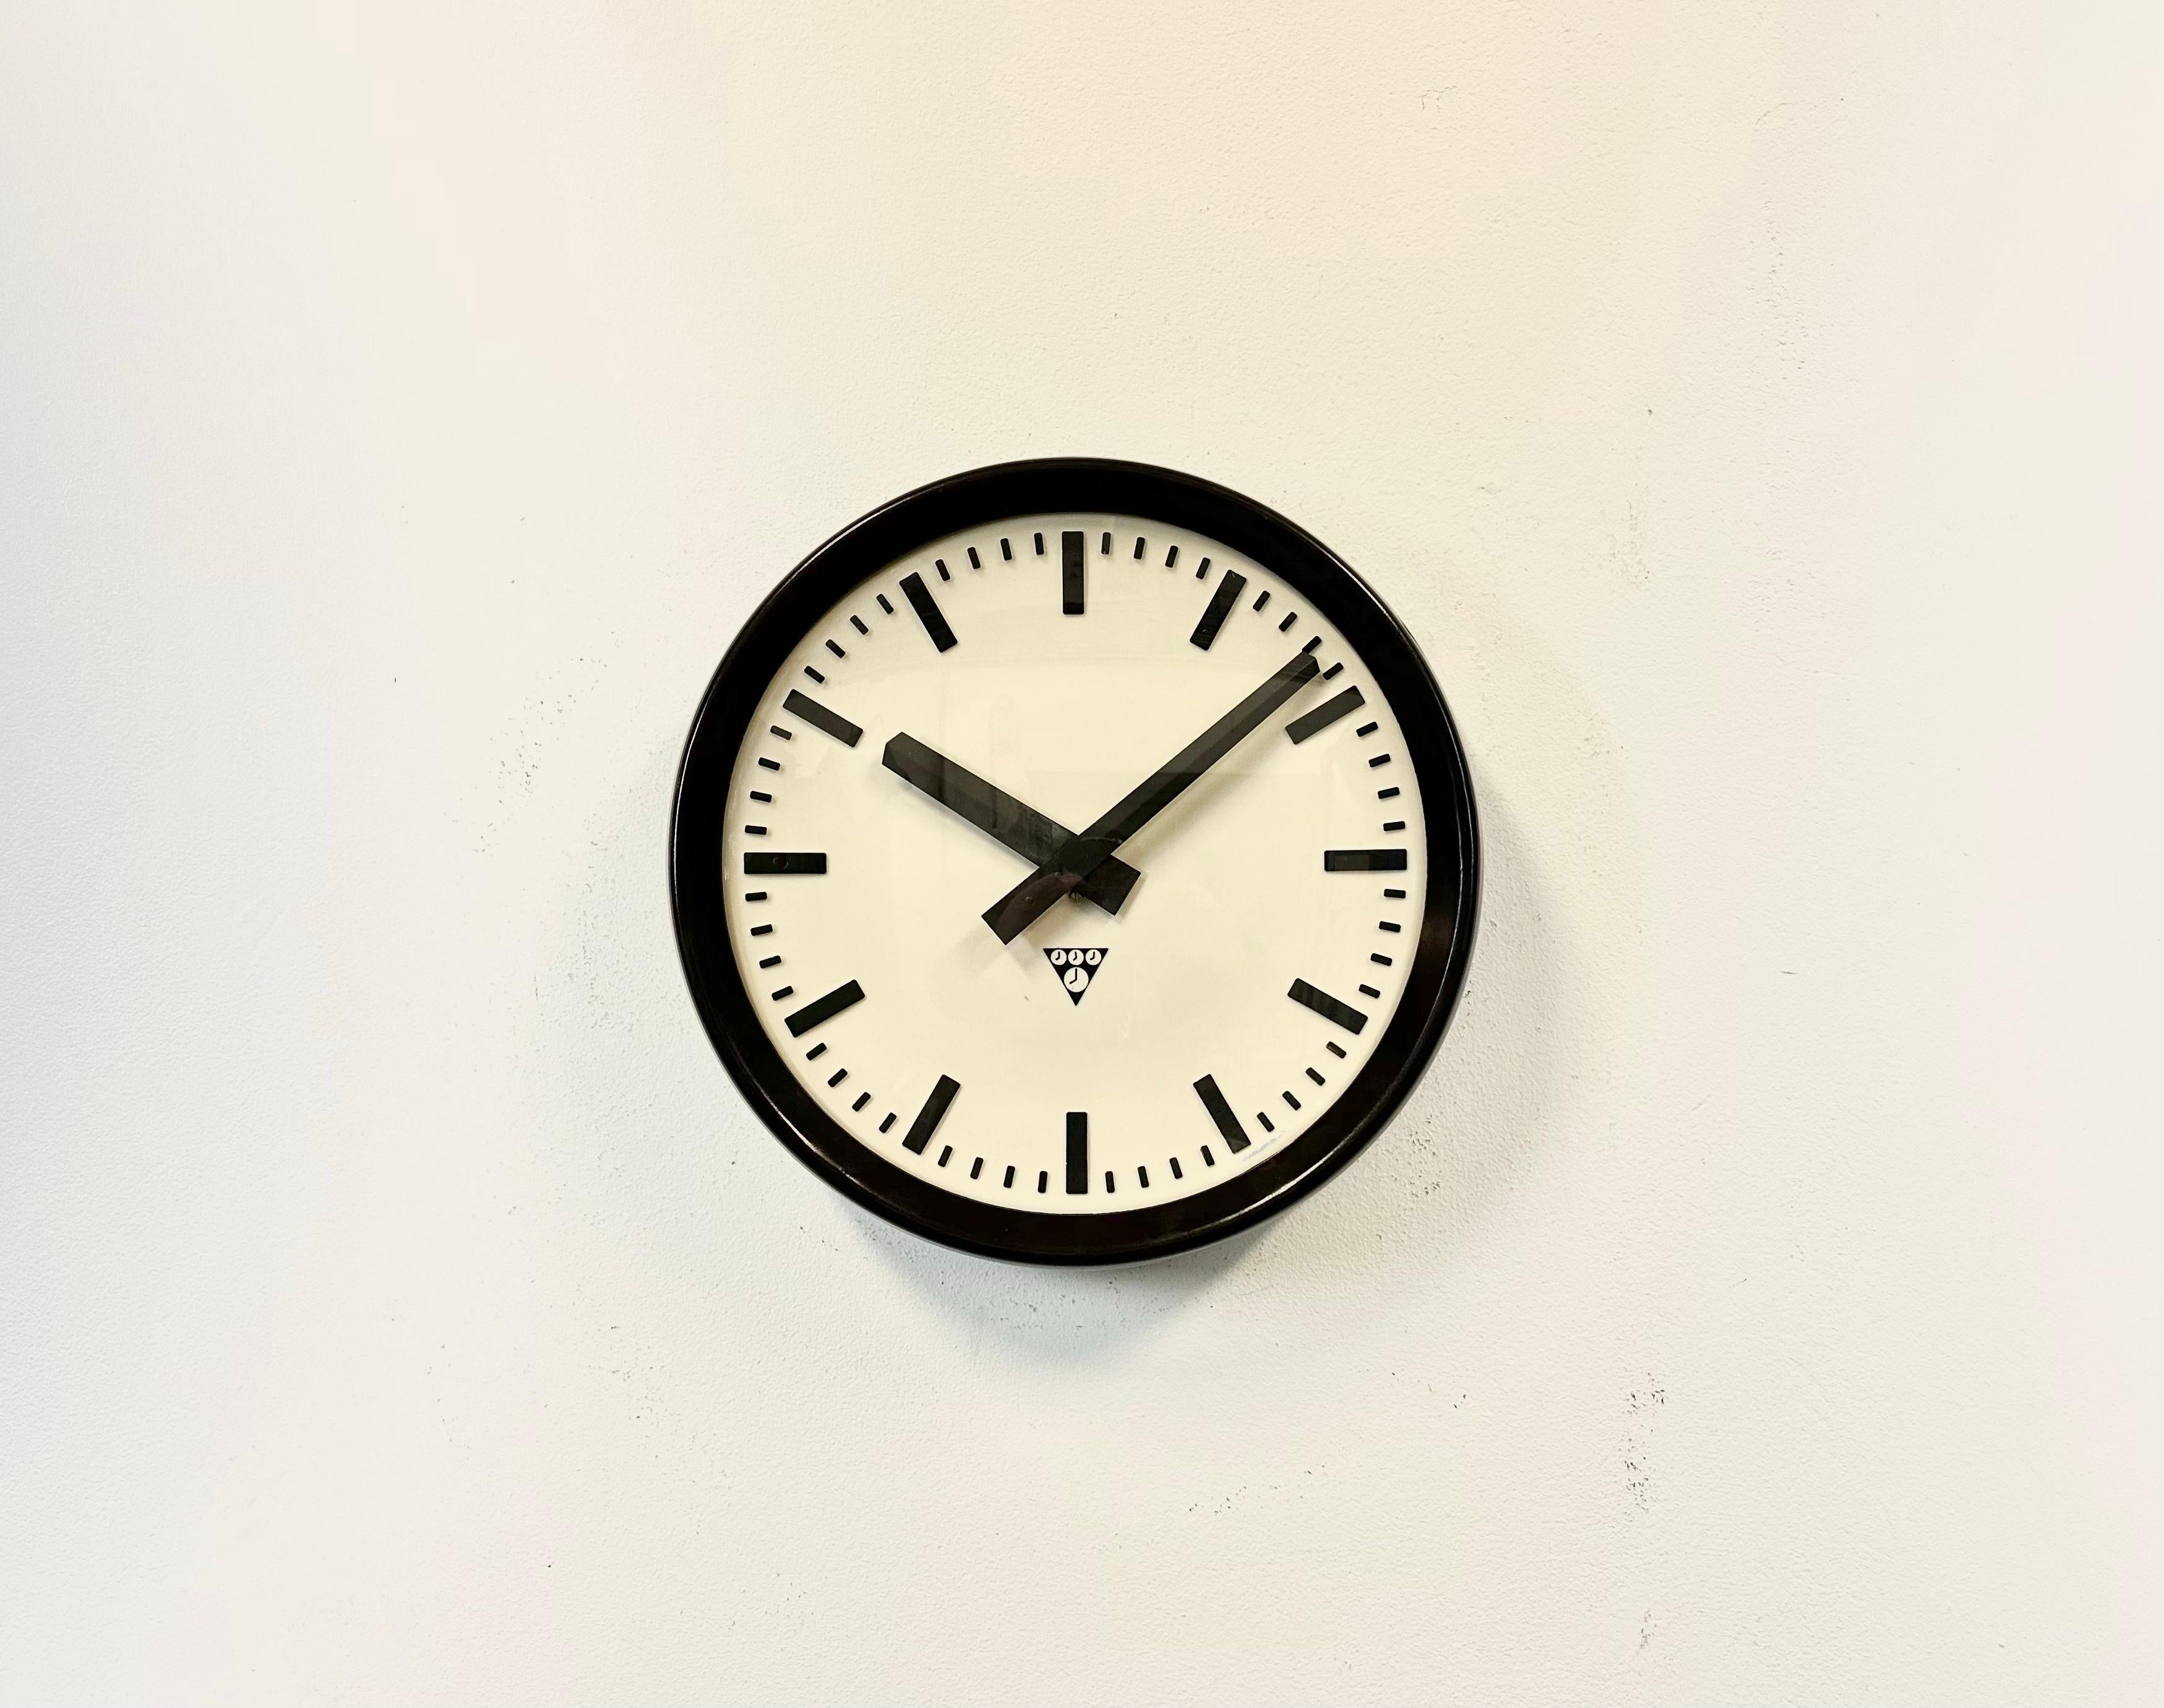 This wall clock was produced by Pragotron in former Czechoslovakia during the 1960s. It features a brown bakelite frame, a white bakelite dial, an aluminium hands, a clear glass cover and brown bakelite back.The piece has been converted into a